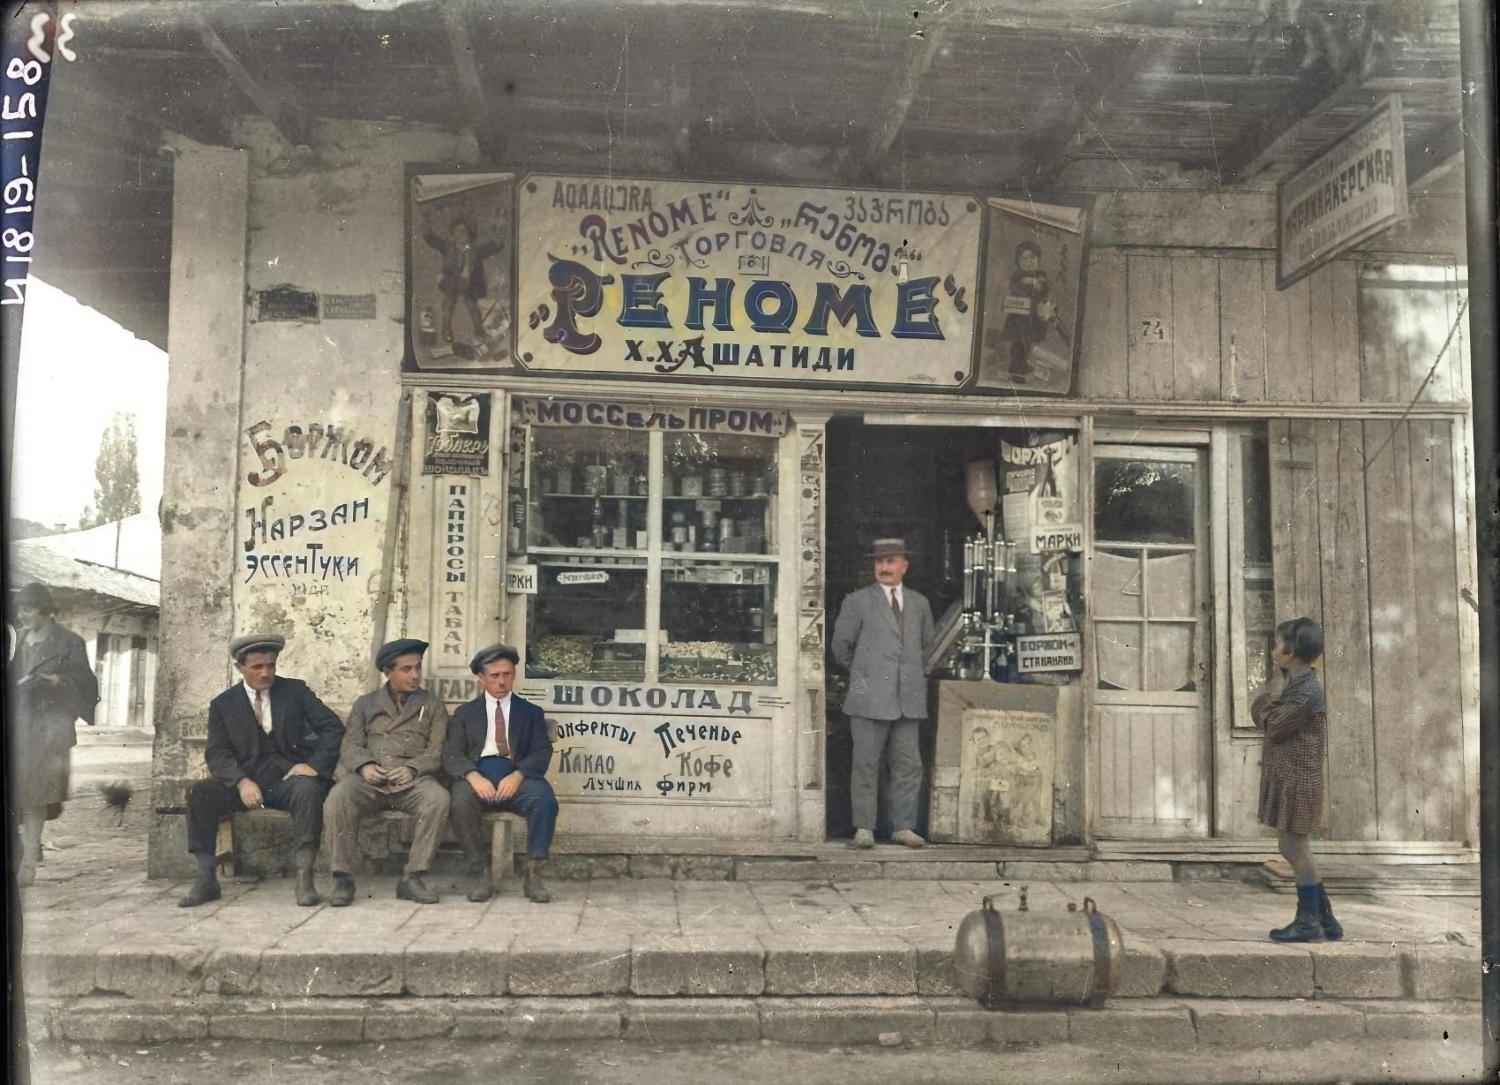 On the far left, smoking, is Nestor Lakoba; in the background is Saria Lakoba. Photo by Eugene Schilling. The scene shows the grocery and tobacco trade of Kharlampiy Khristoforovich Ashatidi, [Greek] “Renome”, located on Liberty Street (known as Lenin Street in Soviet times, and today as Leon Street), Sukhum, Abkhazia, 1929.